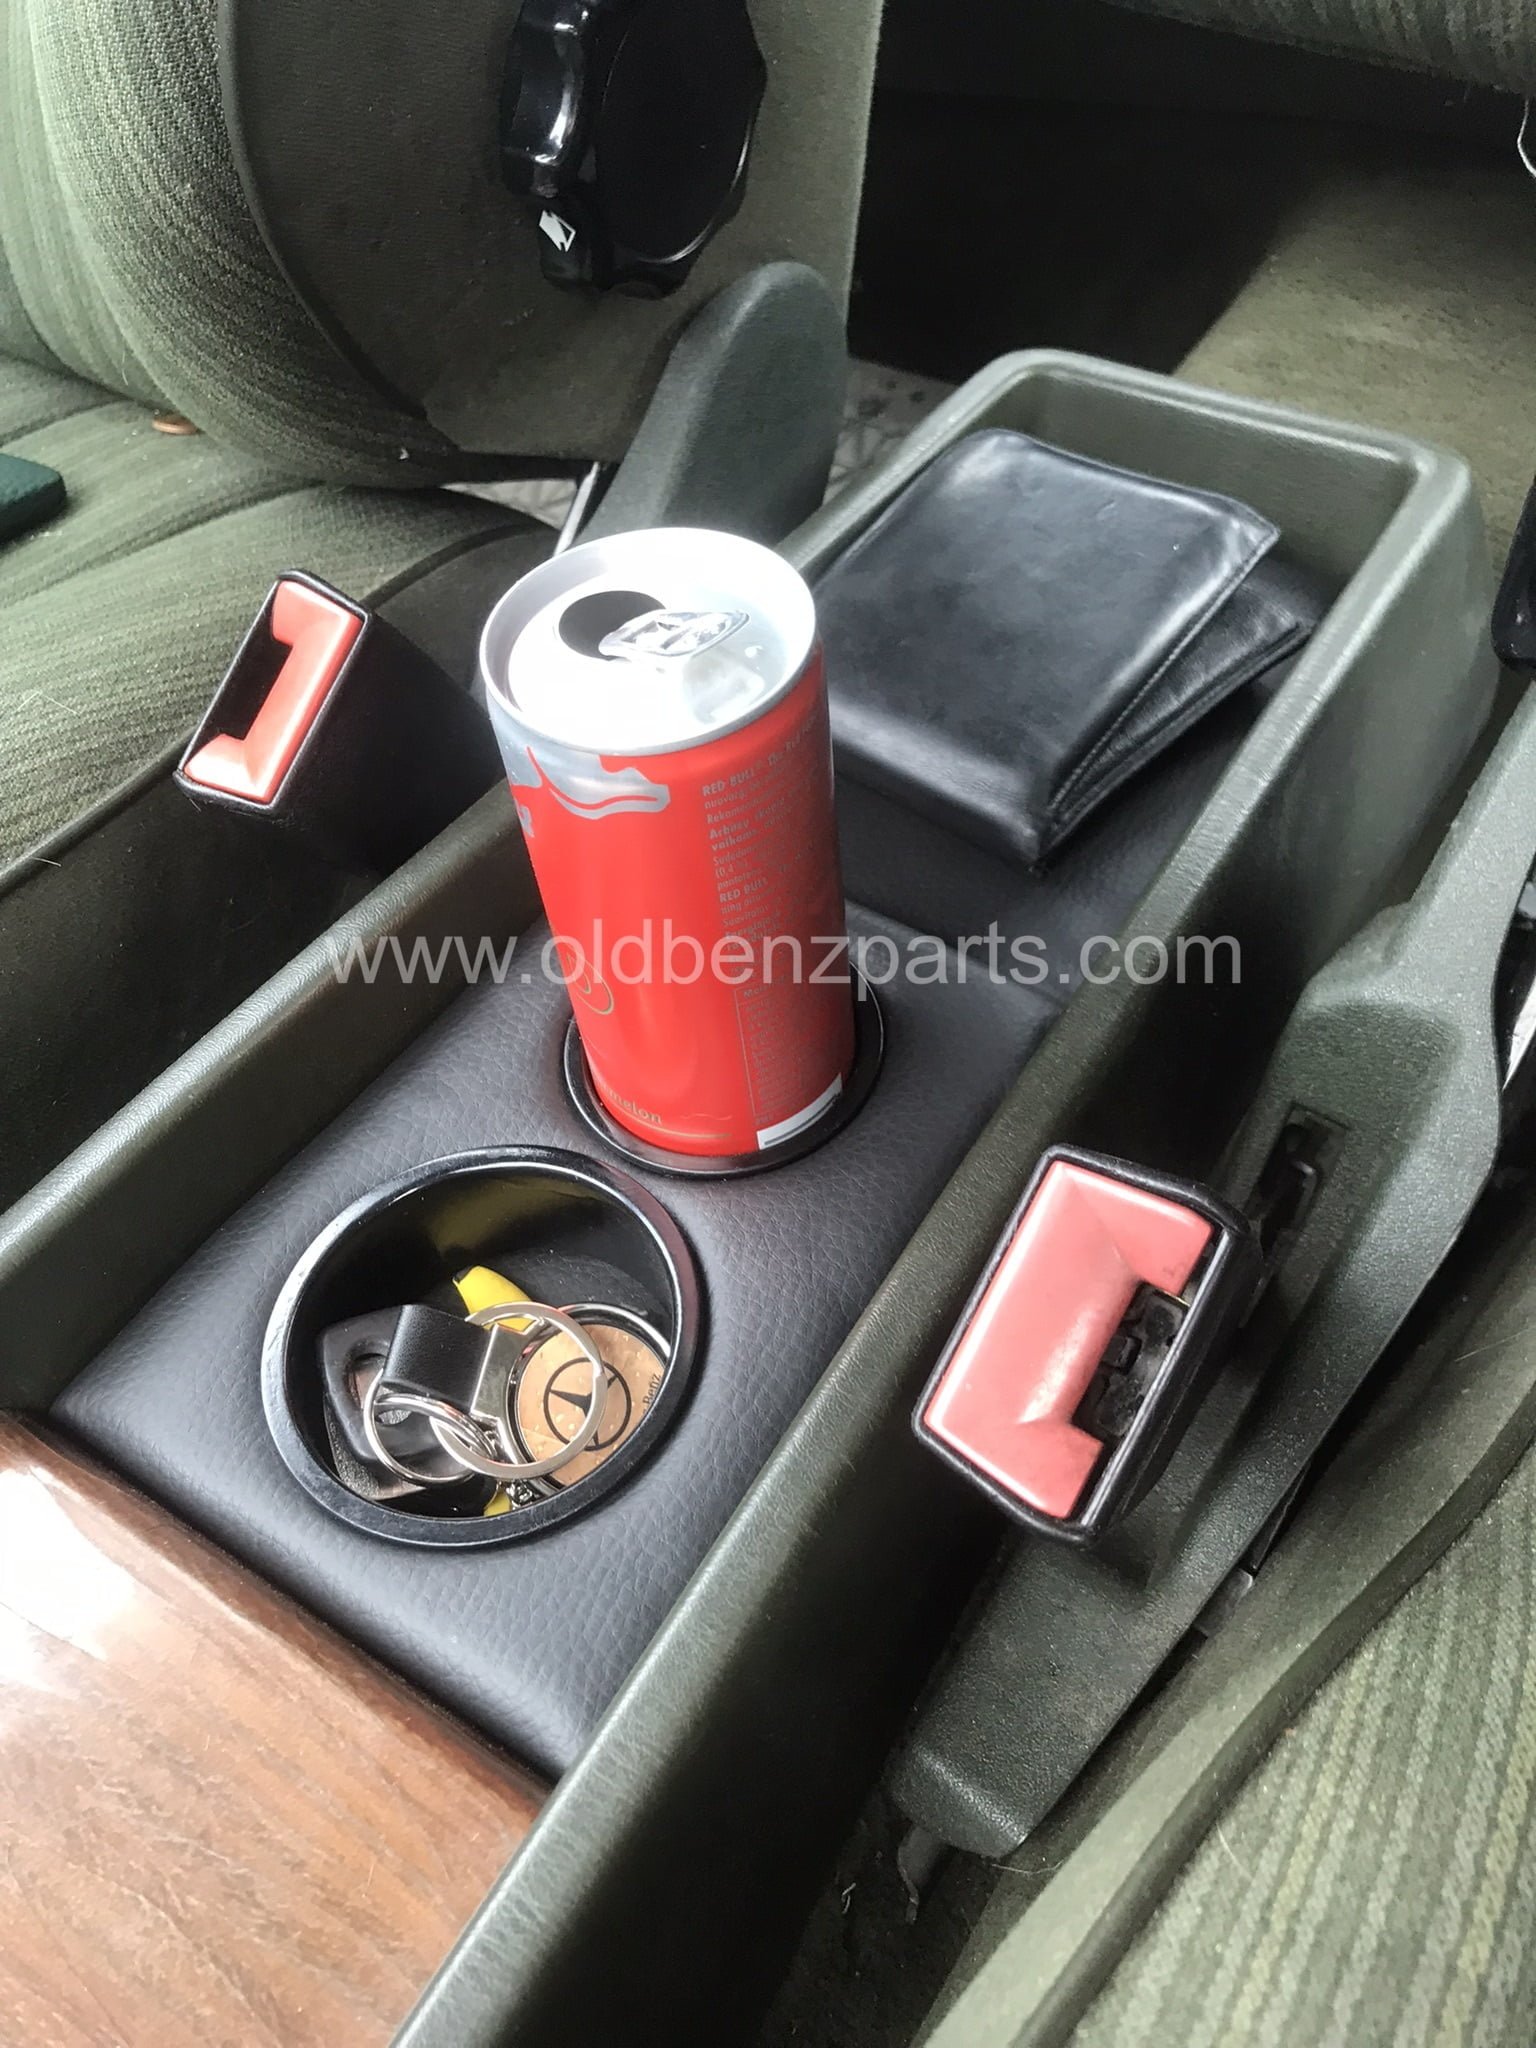 https://oldbenzparts.com/wp-content/uploads/Mercedes-Benz-W124-W123-Custom-Leather-Center-Console-Cup-Holder-Insert-Classic-Car-Accessories-OldBenzParts-17.jpeg